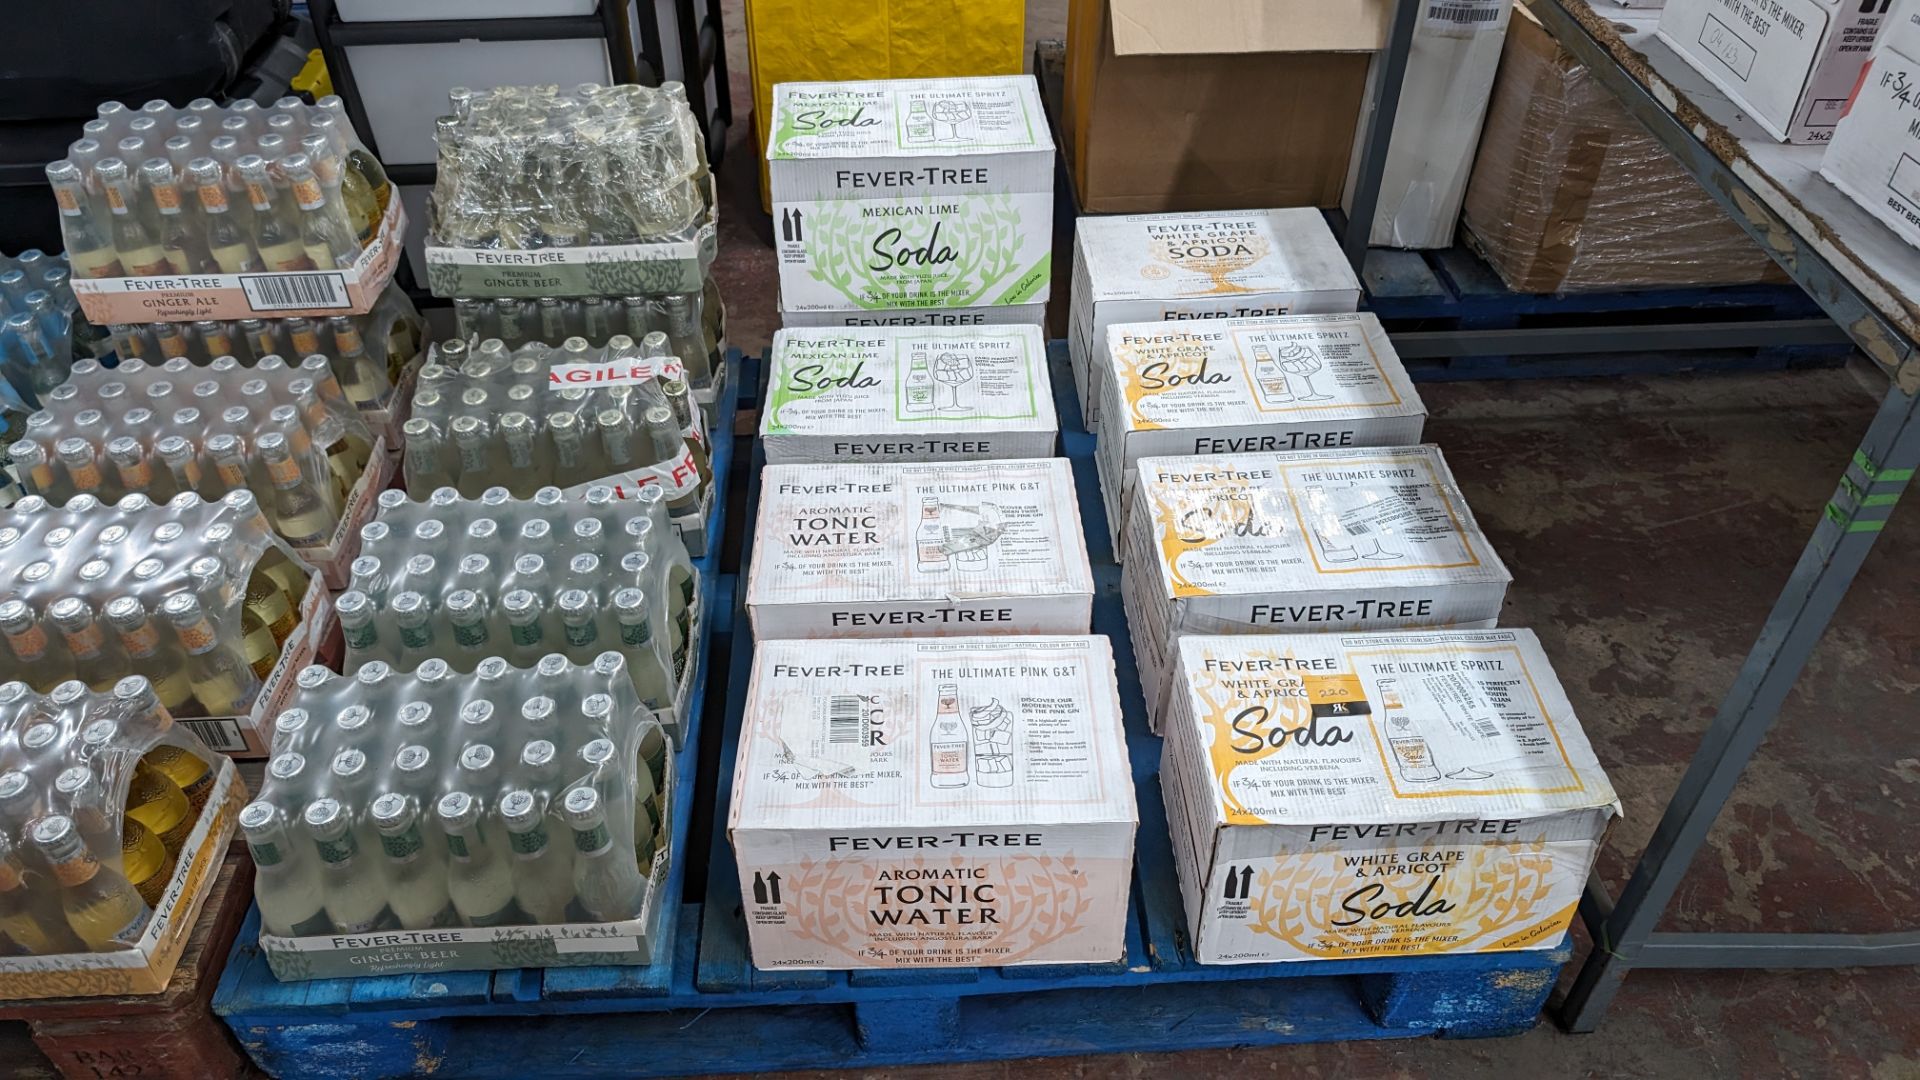 The contents of a pallet of Fever-Tree tonic comprising 9 boxes and 5 trays. NB: The Fever-Tree to